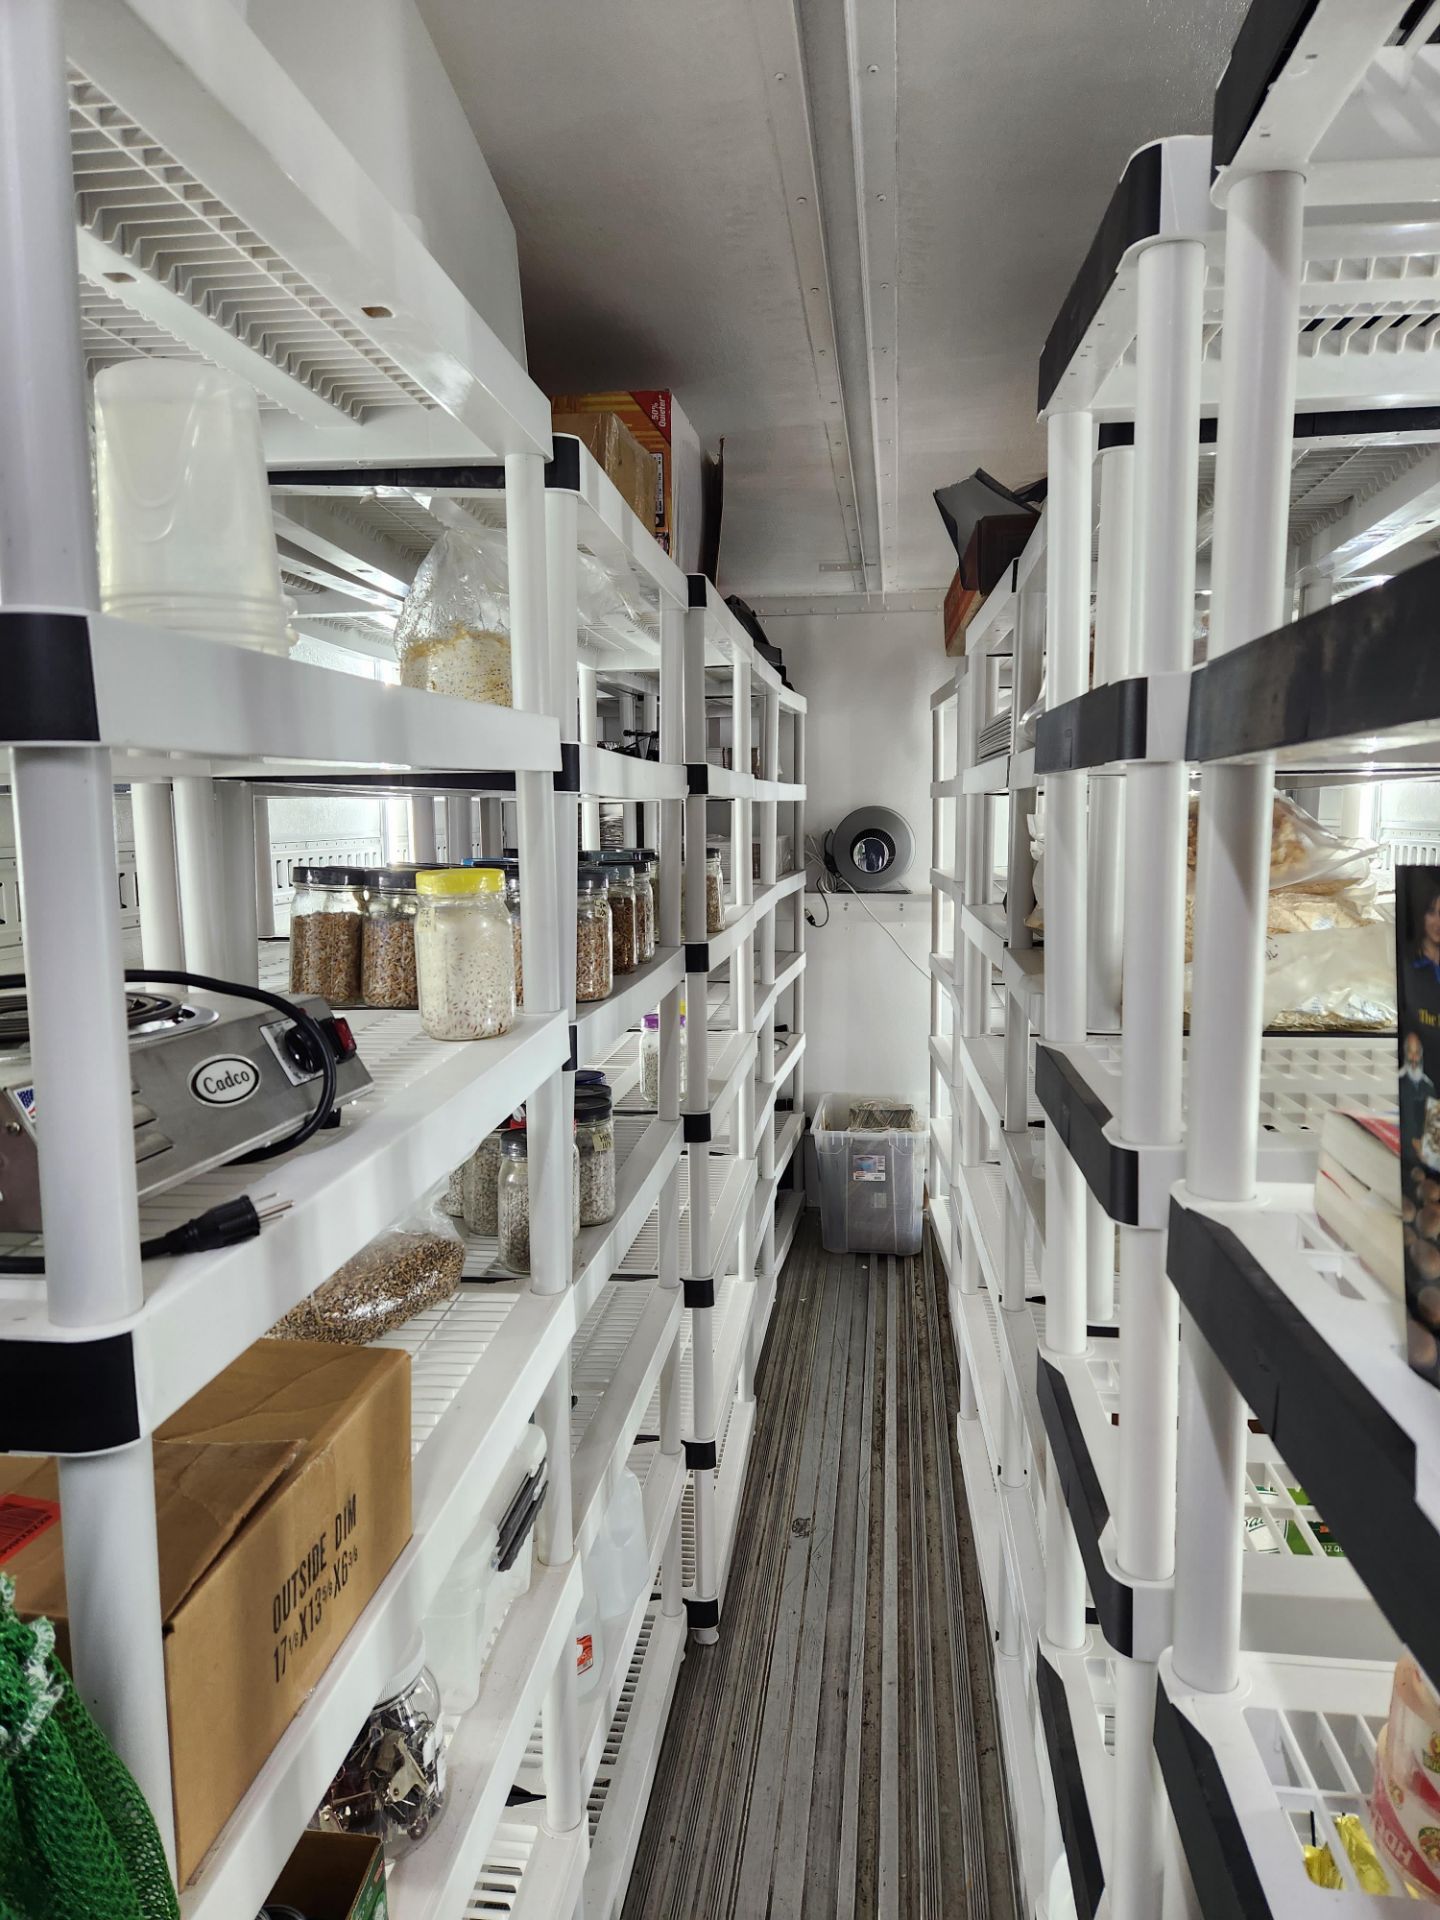 (Located in Portland, OR) Turnkey Mushroom Farm in Trailers (All Items Photoed Included) - Image 15 of 22